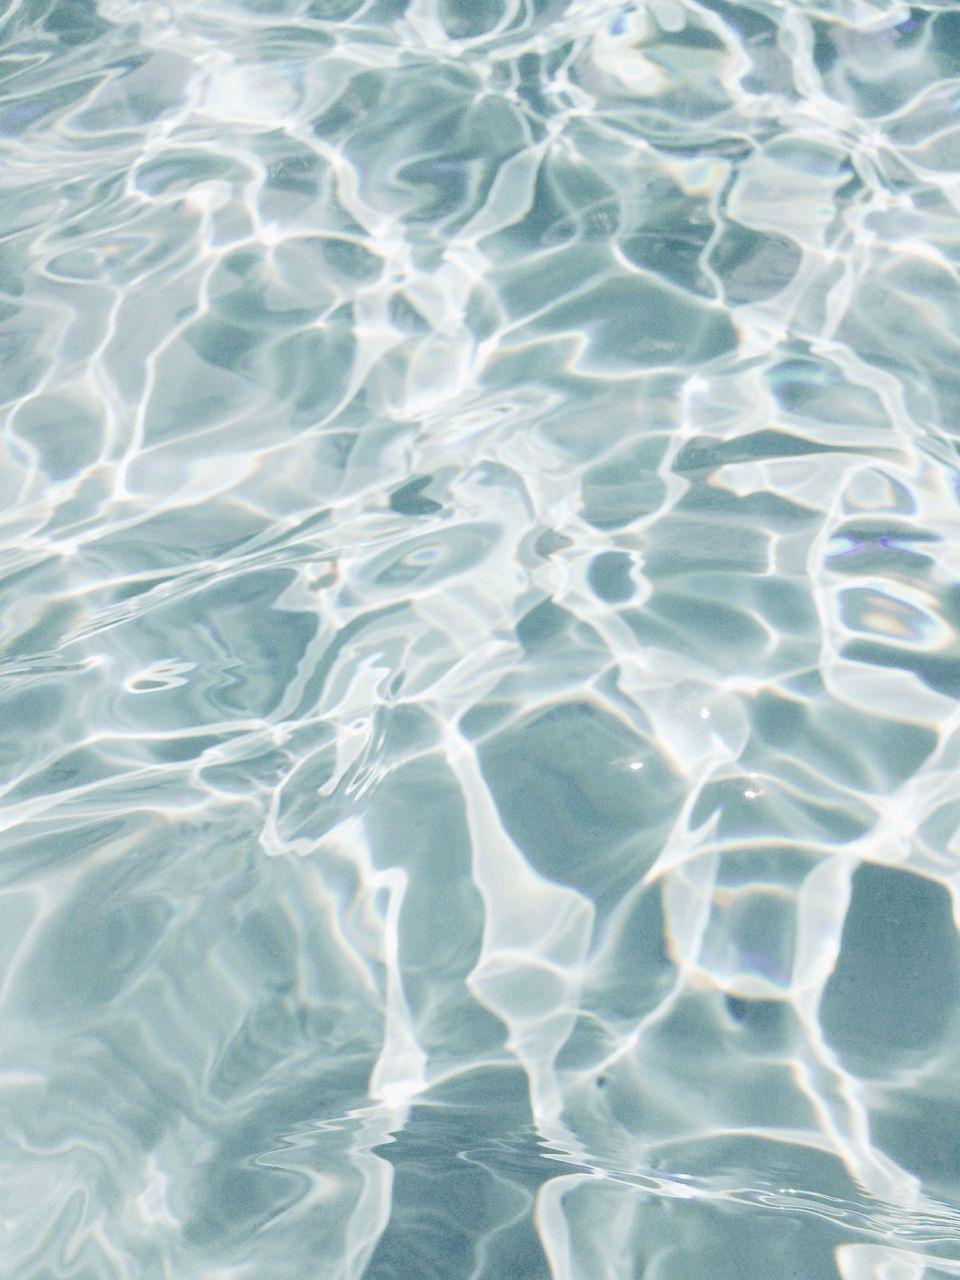 tumblr water backgrounds